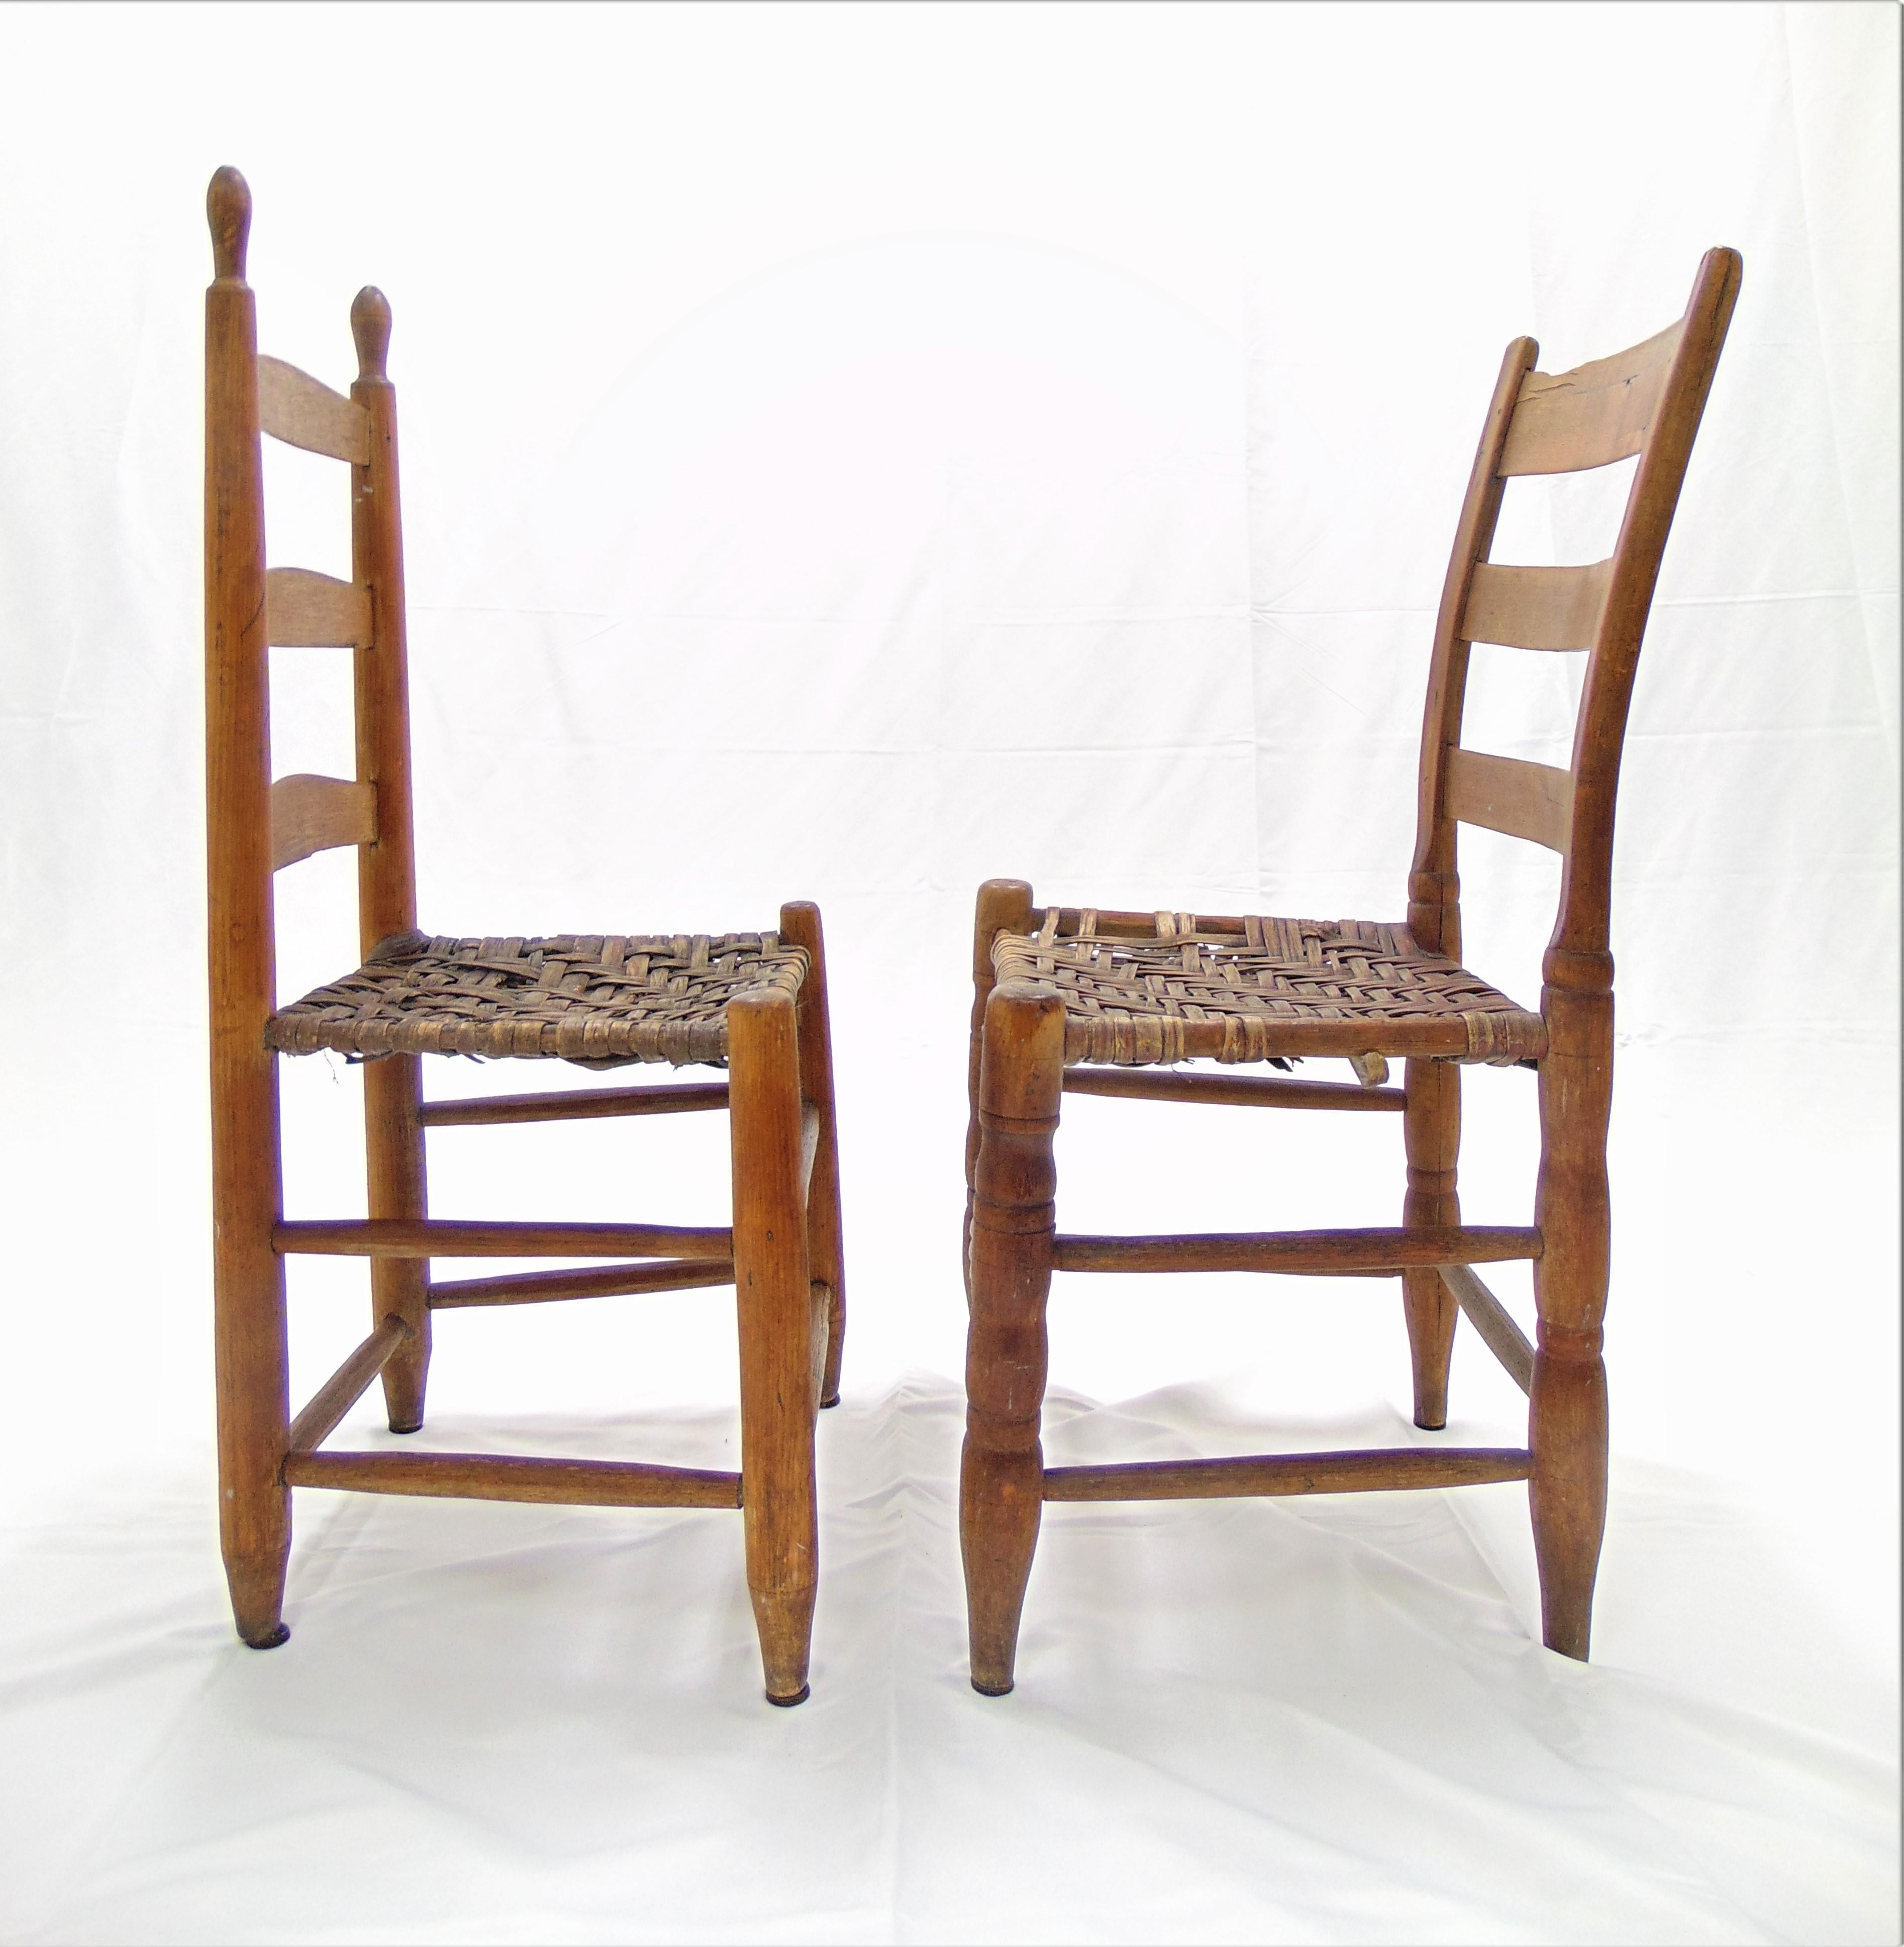 Pair of Antique Primitive Ladder Back and Splint Seats Early 19th Century For Sale 5